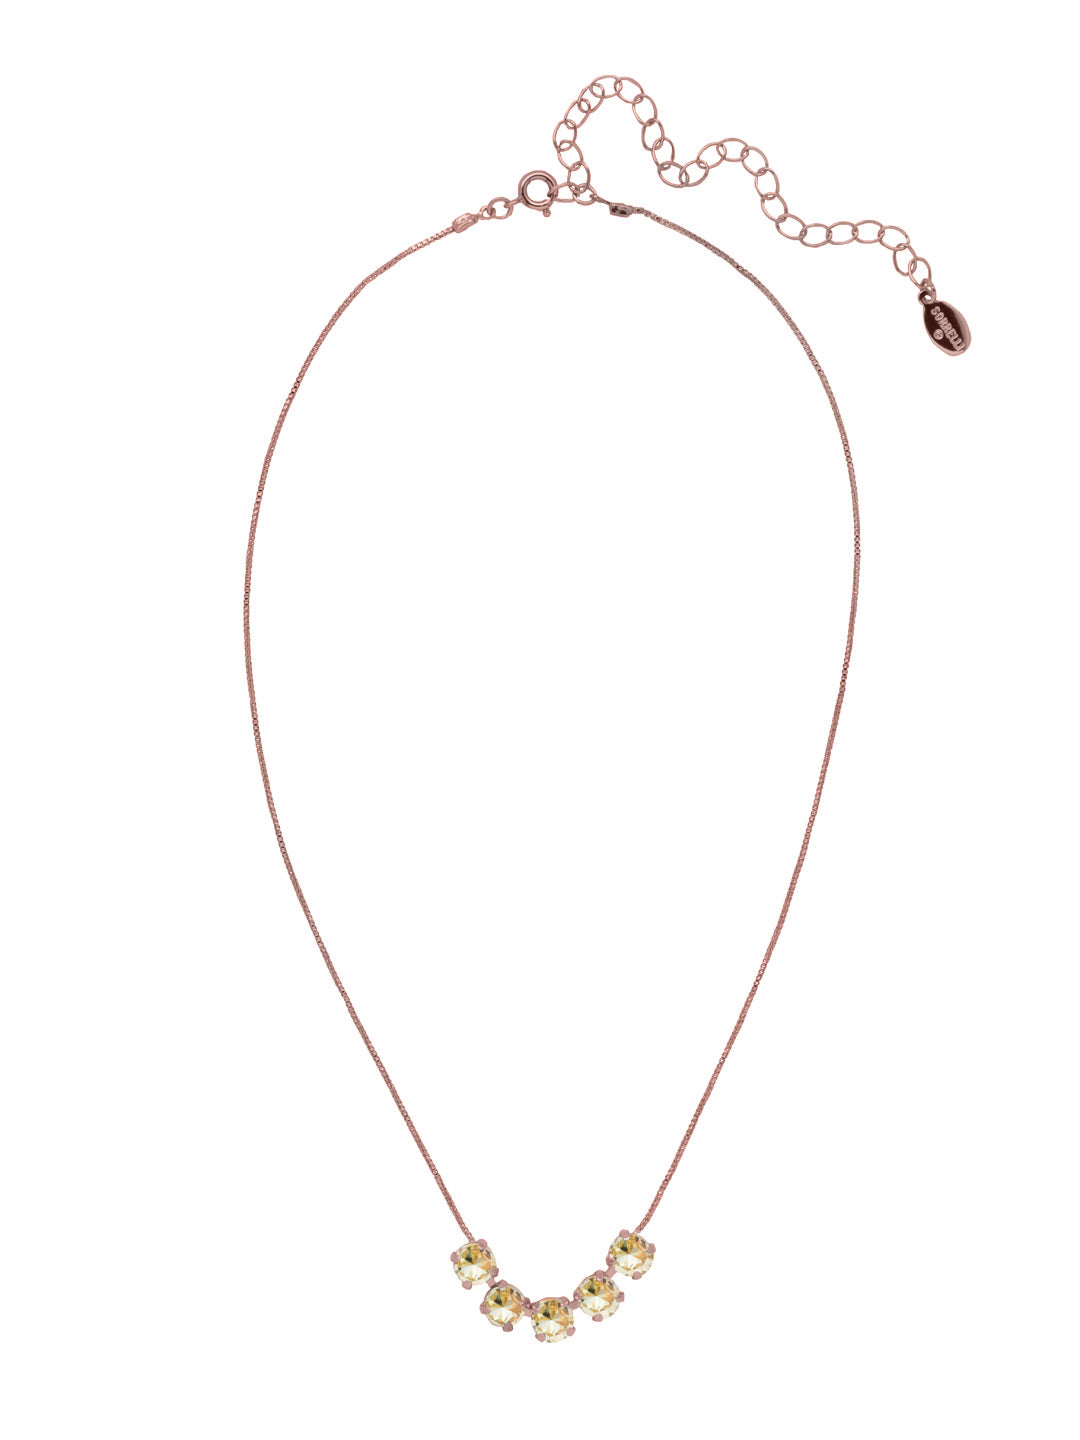 Shaughna Tennis Necklace - NFC84RGCCH - <p>The Shaughna Tennis Necklace features five crystals on a delicate adjustable chain. From Sorrelli's Crystal Champagne collection in our Rose Gold-tone finish.</p>